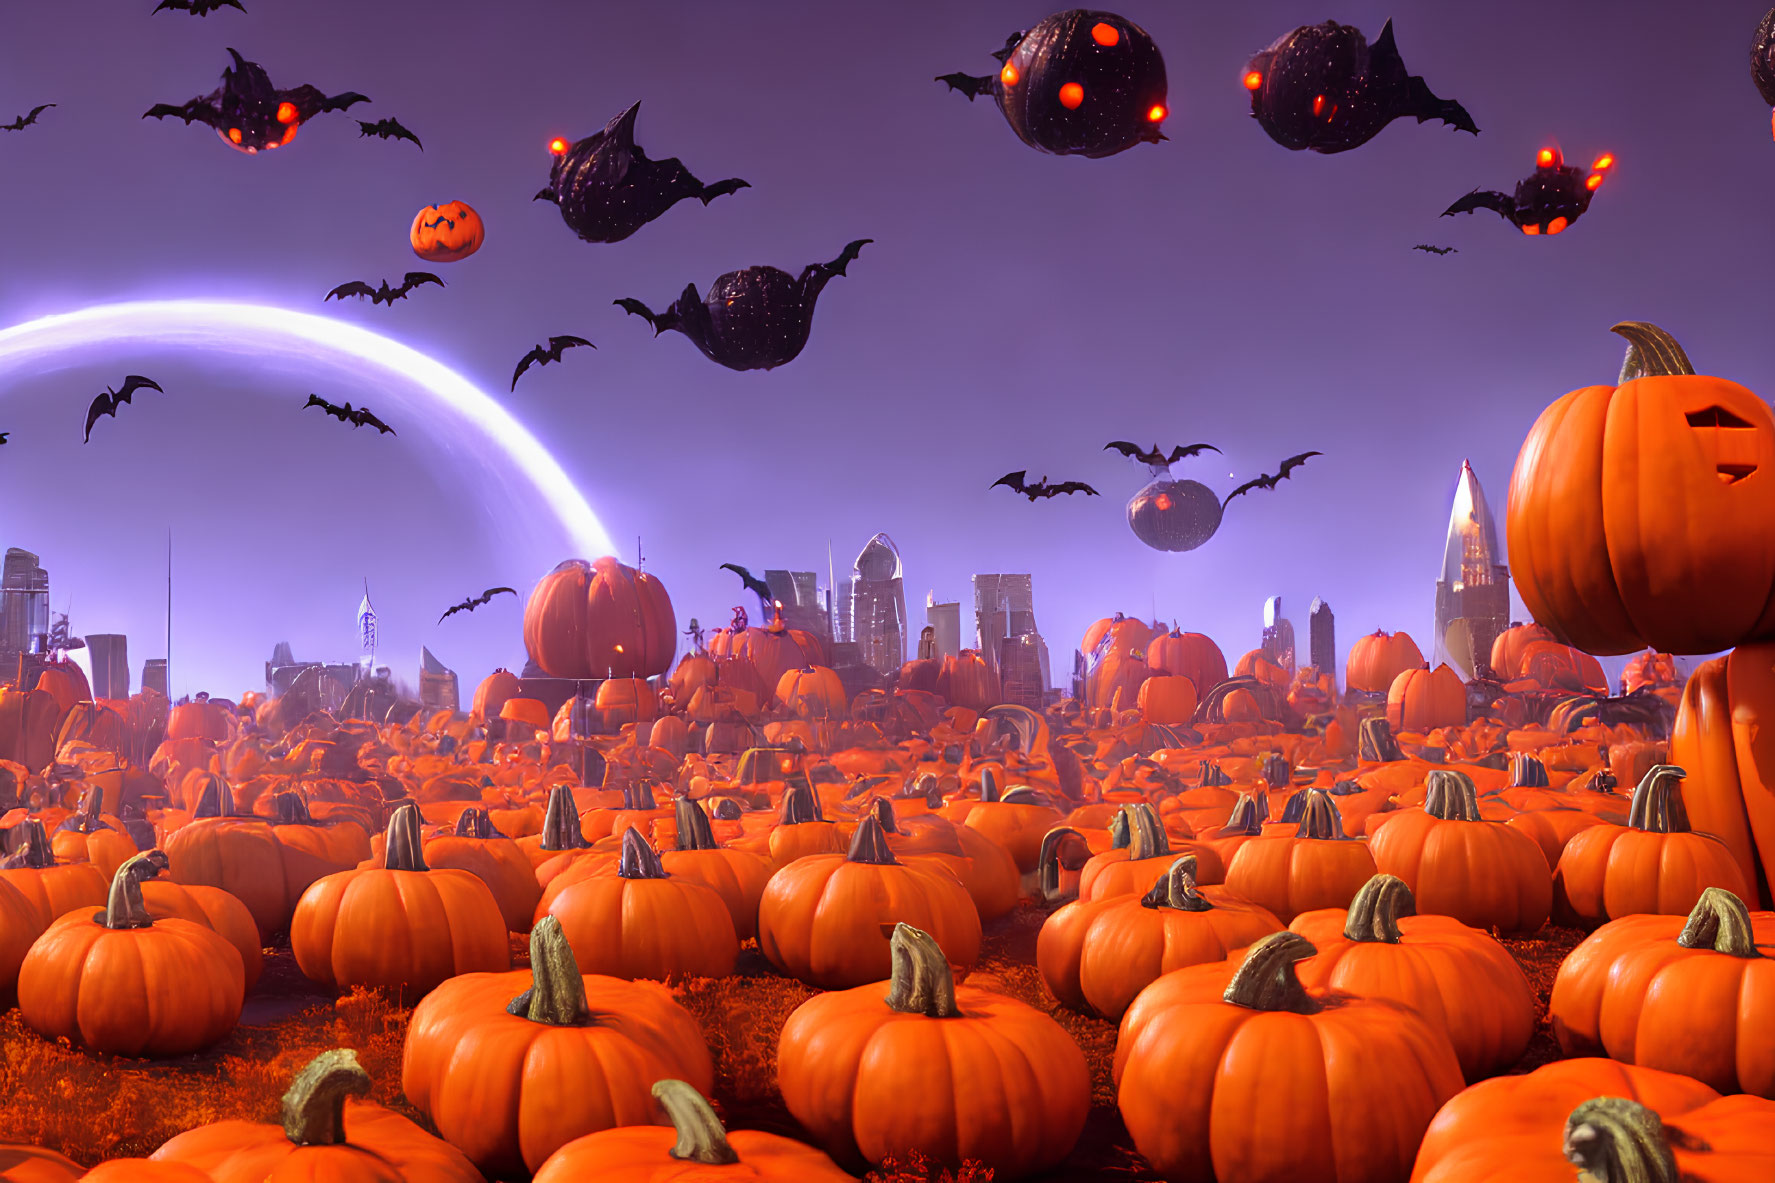 Colorful Halloween Illustration with Bats, Pumpkins, City Skyline, and Glowing Horizon